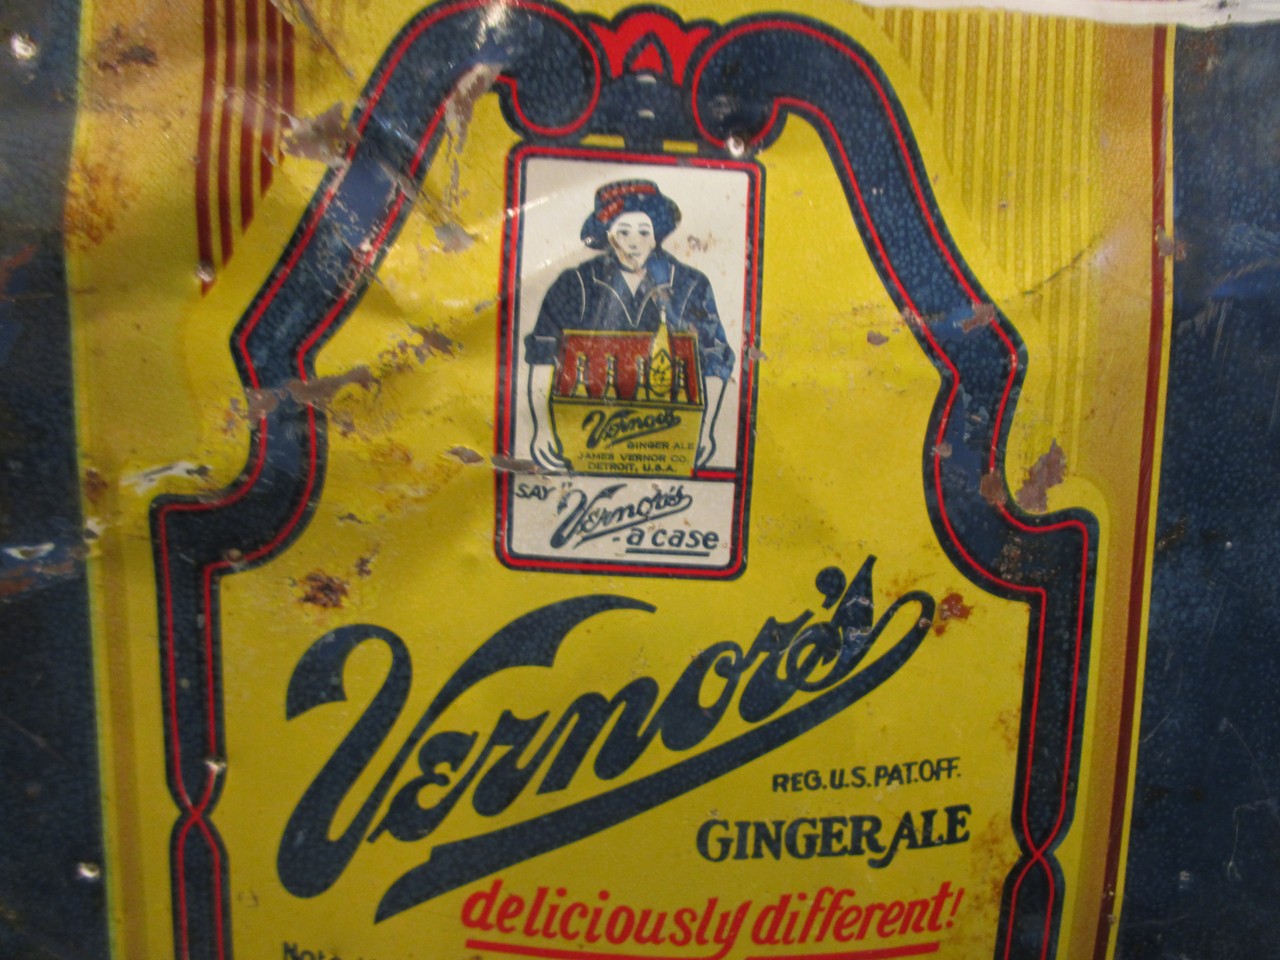 The original mascot of Vernor's was a delivery boy bearing a case of Vernor's ginger ale.